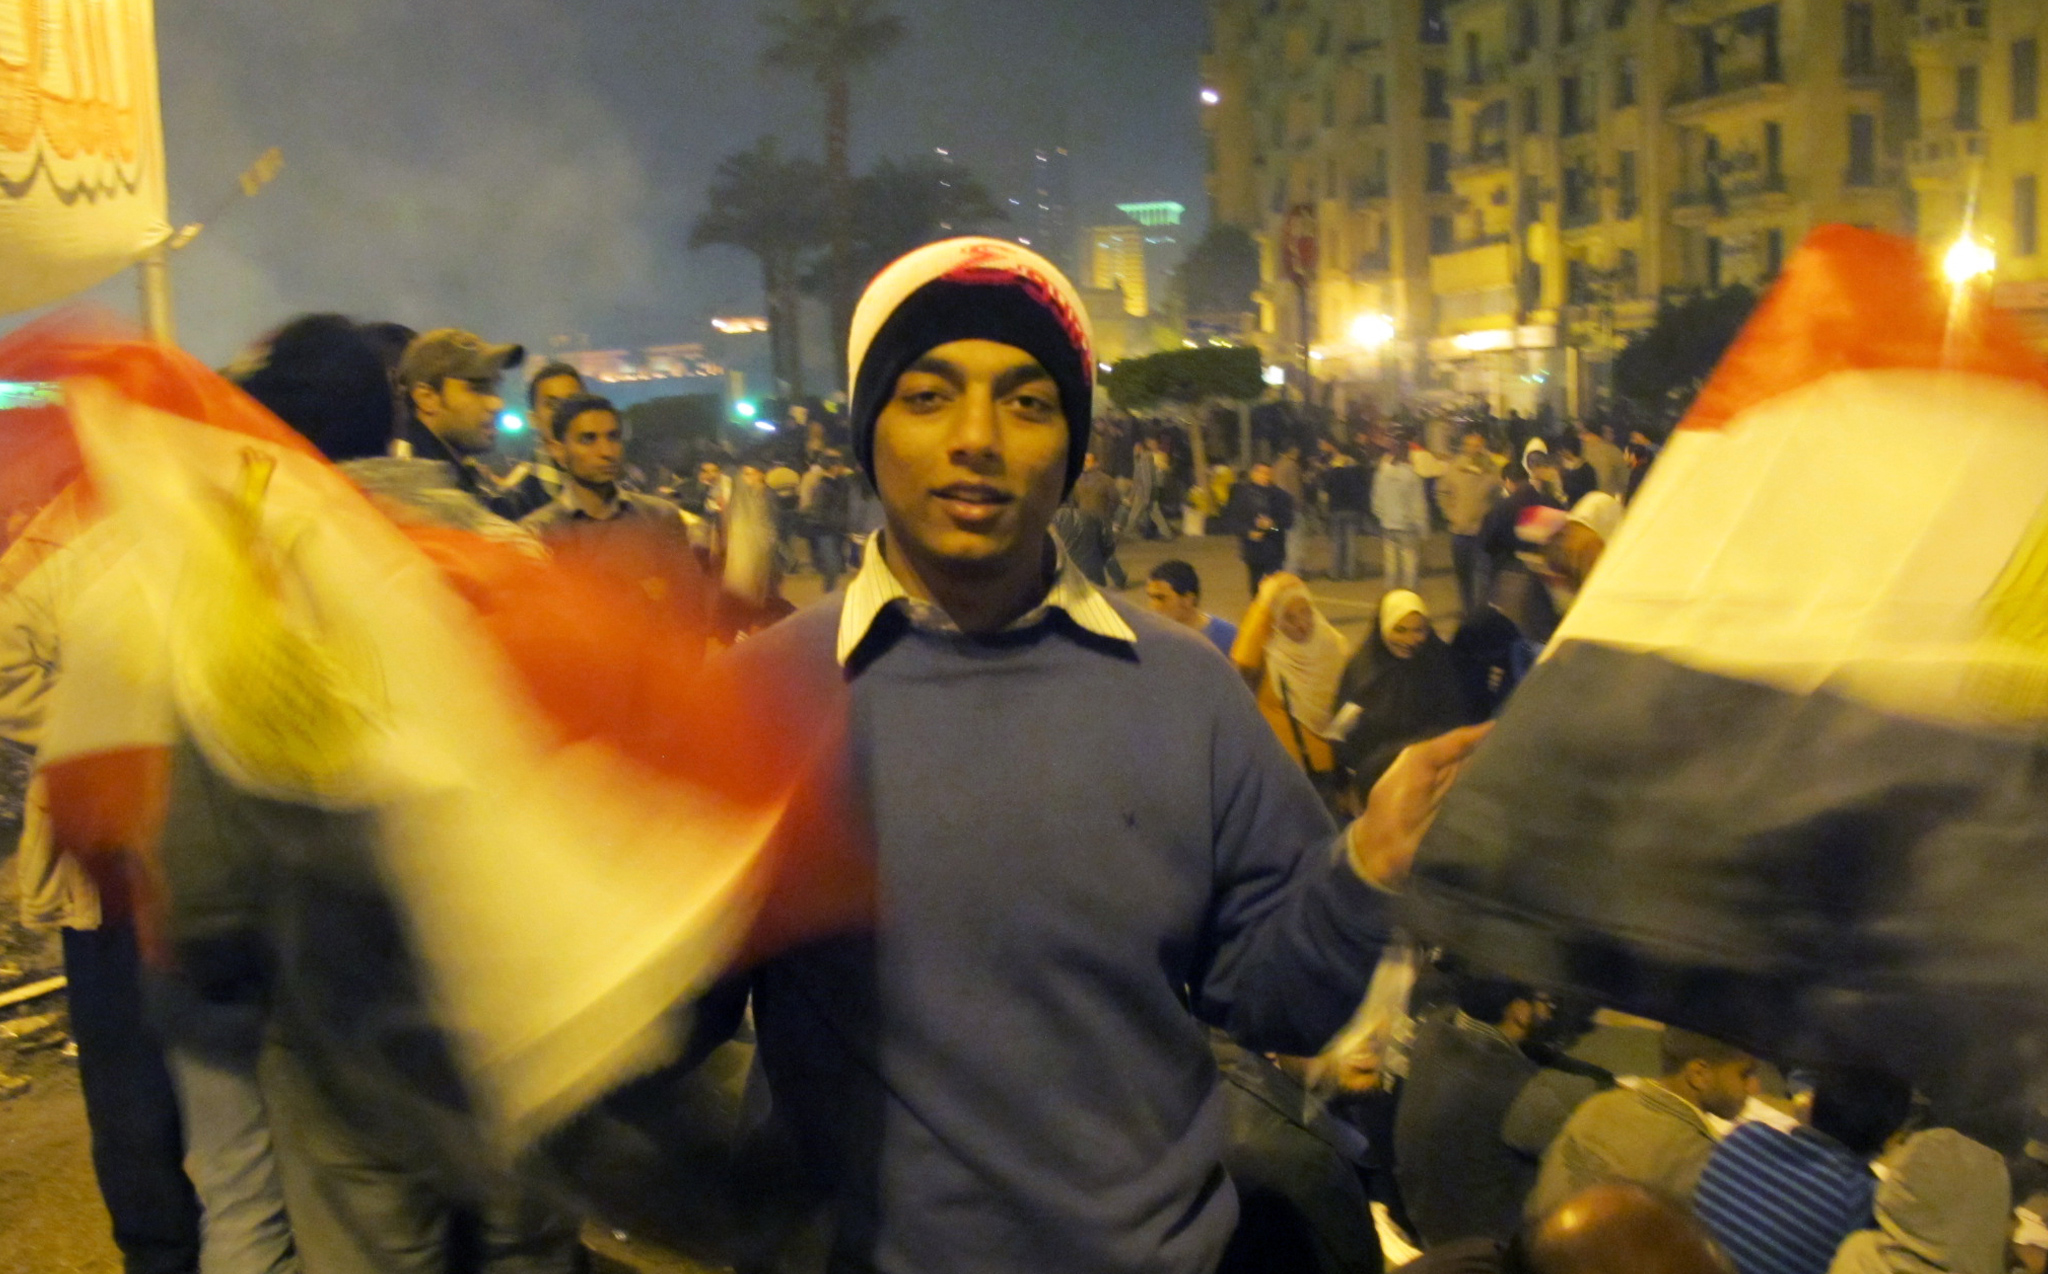  At night, demonstrators slept on the ground in Tahrir Square. Others spent their time trying <br>
to make money, such as this Egyptian flag vendor. (Photo credit: Marc Daou)
